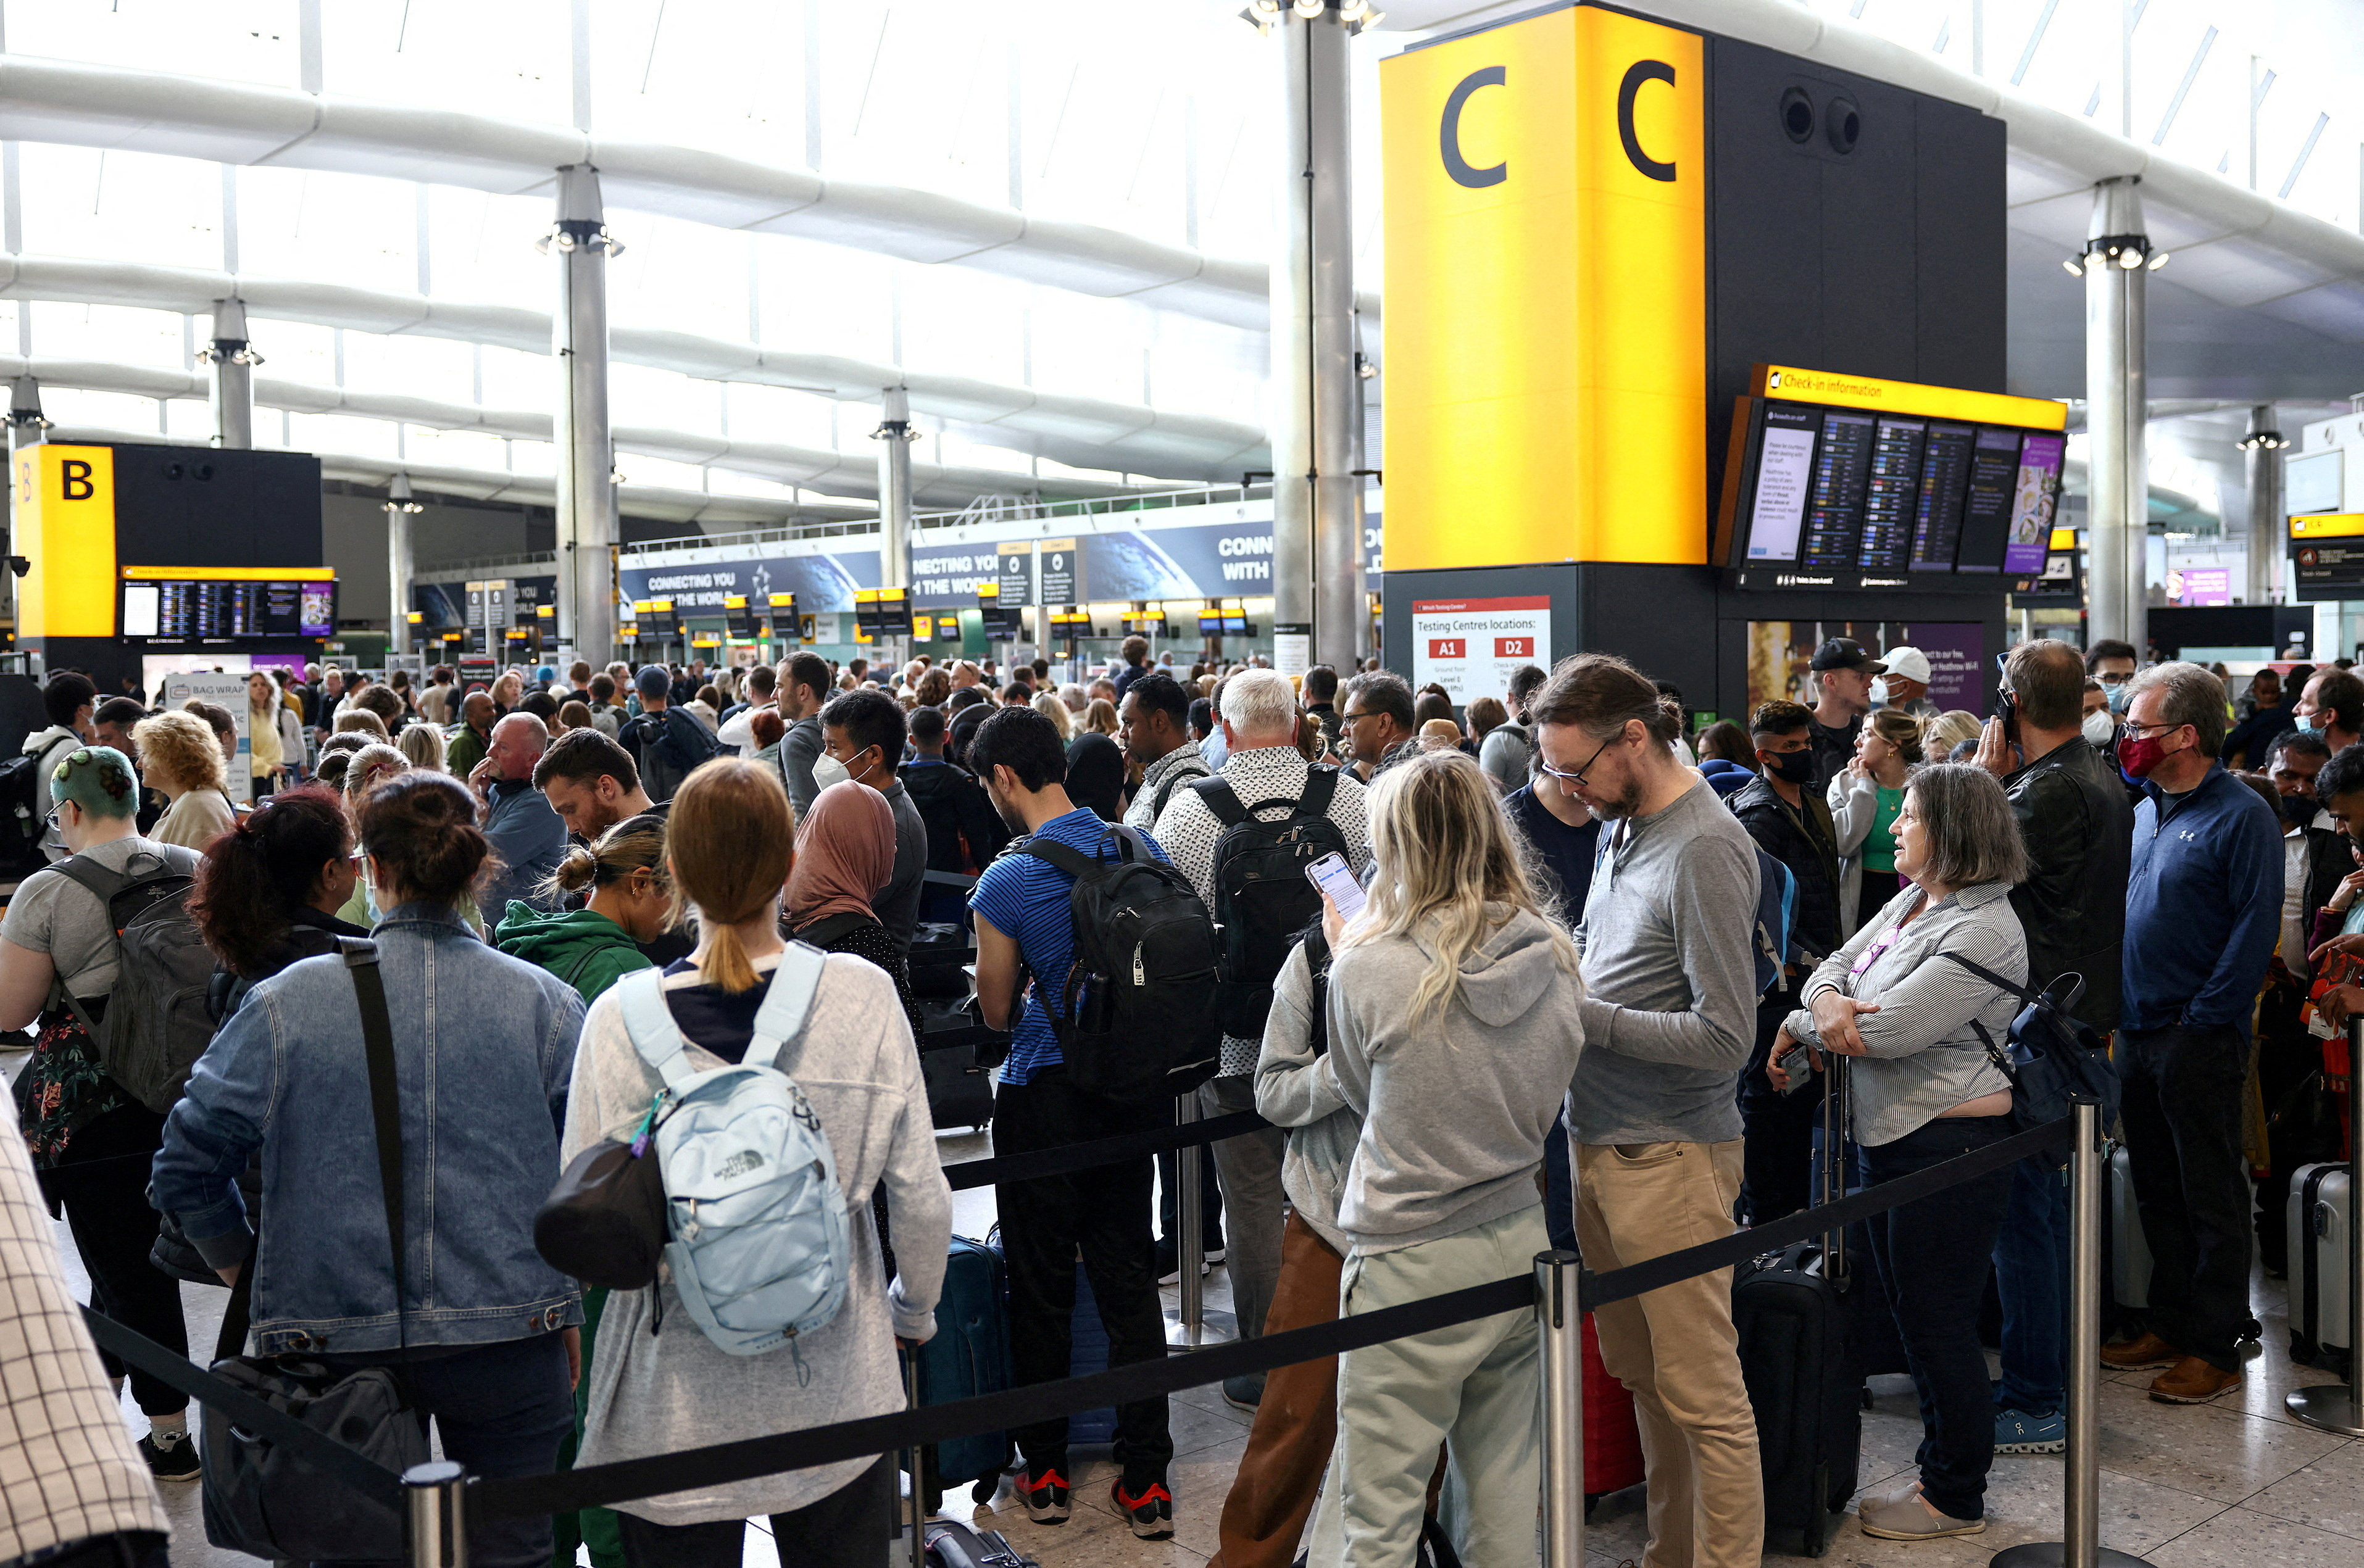 Passengers queue inside Heathrow Airport in London, which will be affected by strikes. Photo: Reuters